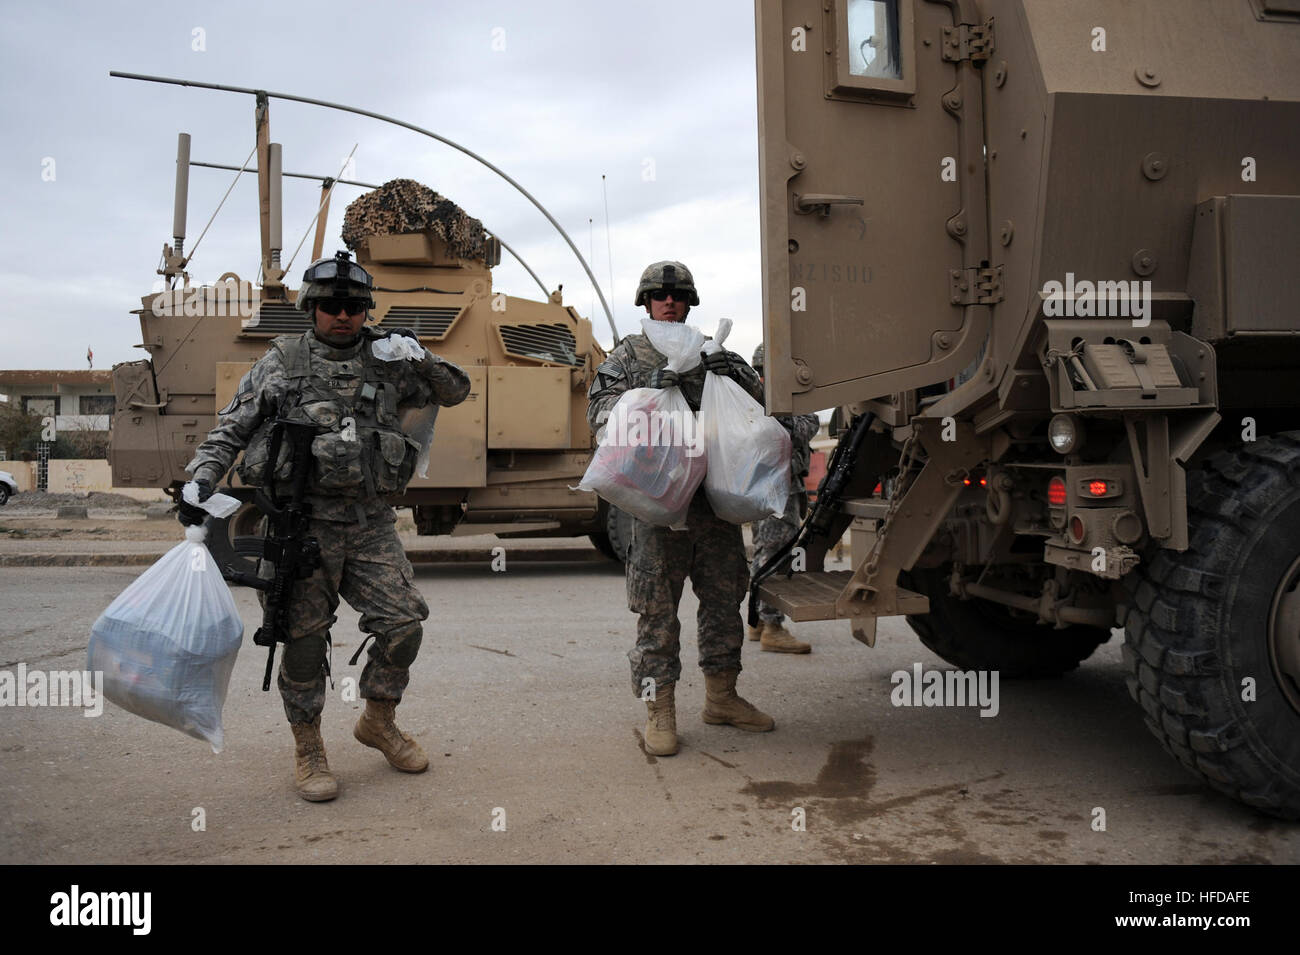 Spc. Emmanuel Madera and Spc. Jerrad Spruell, from the 1st Cavalry Division, 2nd Brigade Combat Team, 9th Cavalry, 4th Squadron, 3rd Platoon (4-9 Cav), carry toys into the Youth Center in Darquq, Iraq, Nov. 25, 2009. The 4-9 Cav and the Daquq police department delived toys and supplies to more than 150 children gathered at the Youth Center in honor of the Iraqi Junior Heroes Program, which is designed to help children become more comfortable with Iraqi security forces, and teach children what they can do to strengthen their community.  (U.S. Navy photo by Mass Communication Specialist 2nd Clas Stock Photo